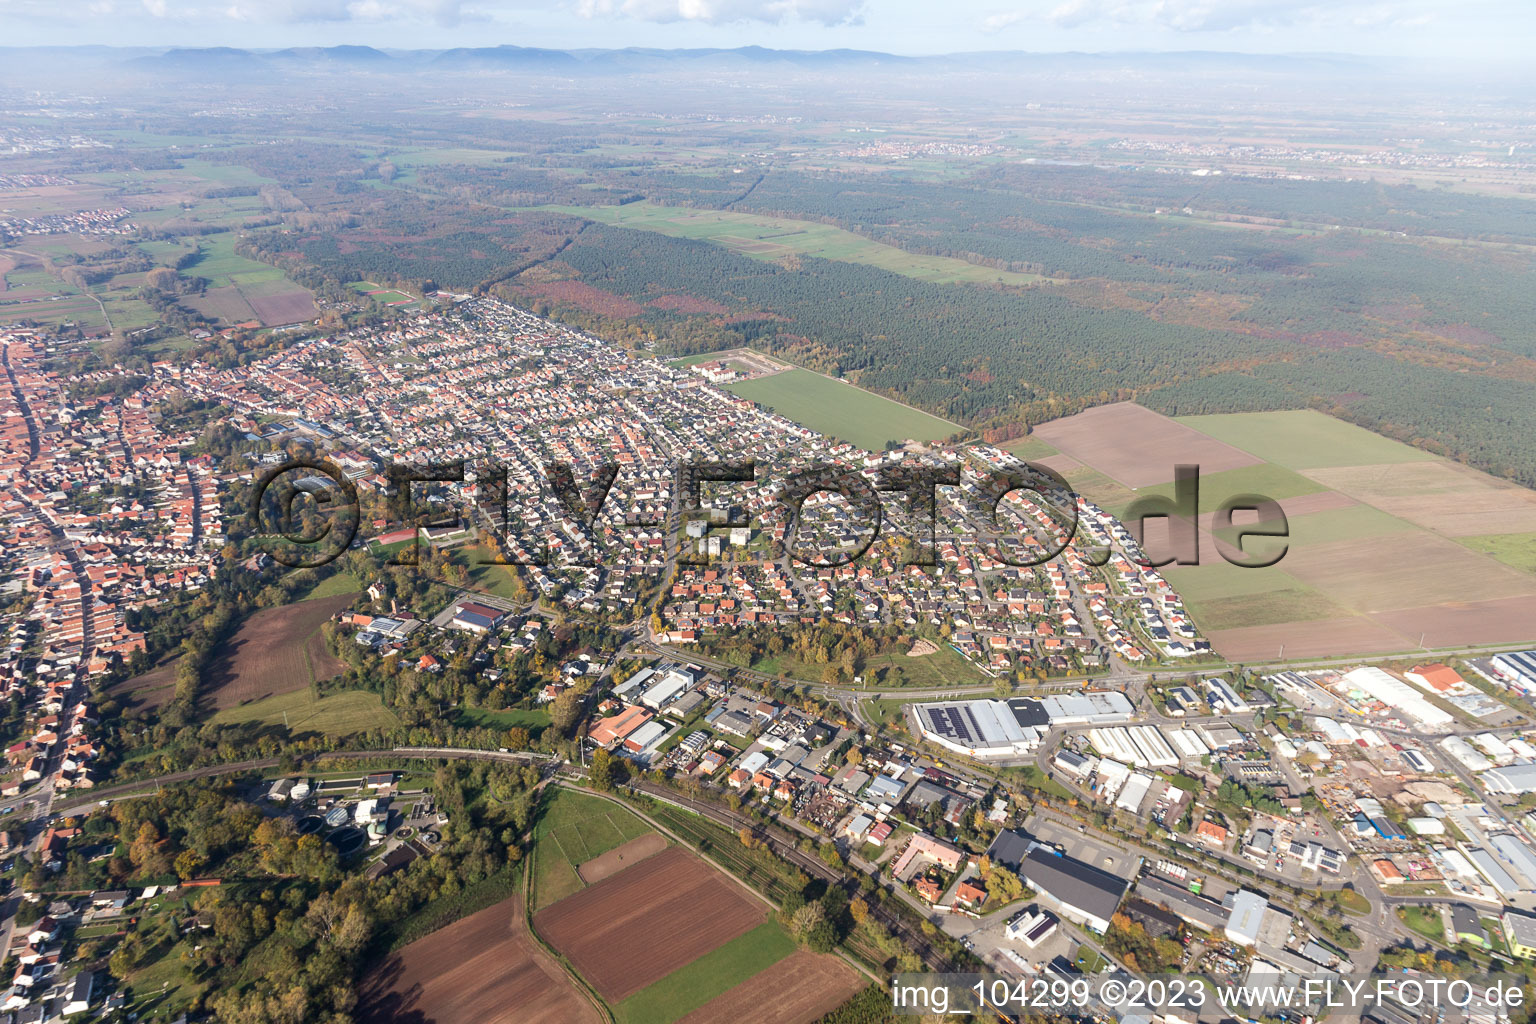 Bellheim in the state Rhineland-Palatinate, Germany from above